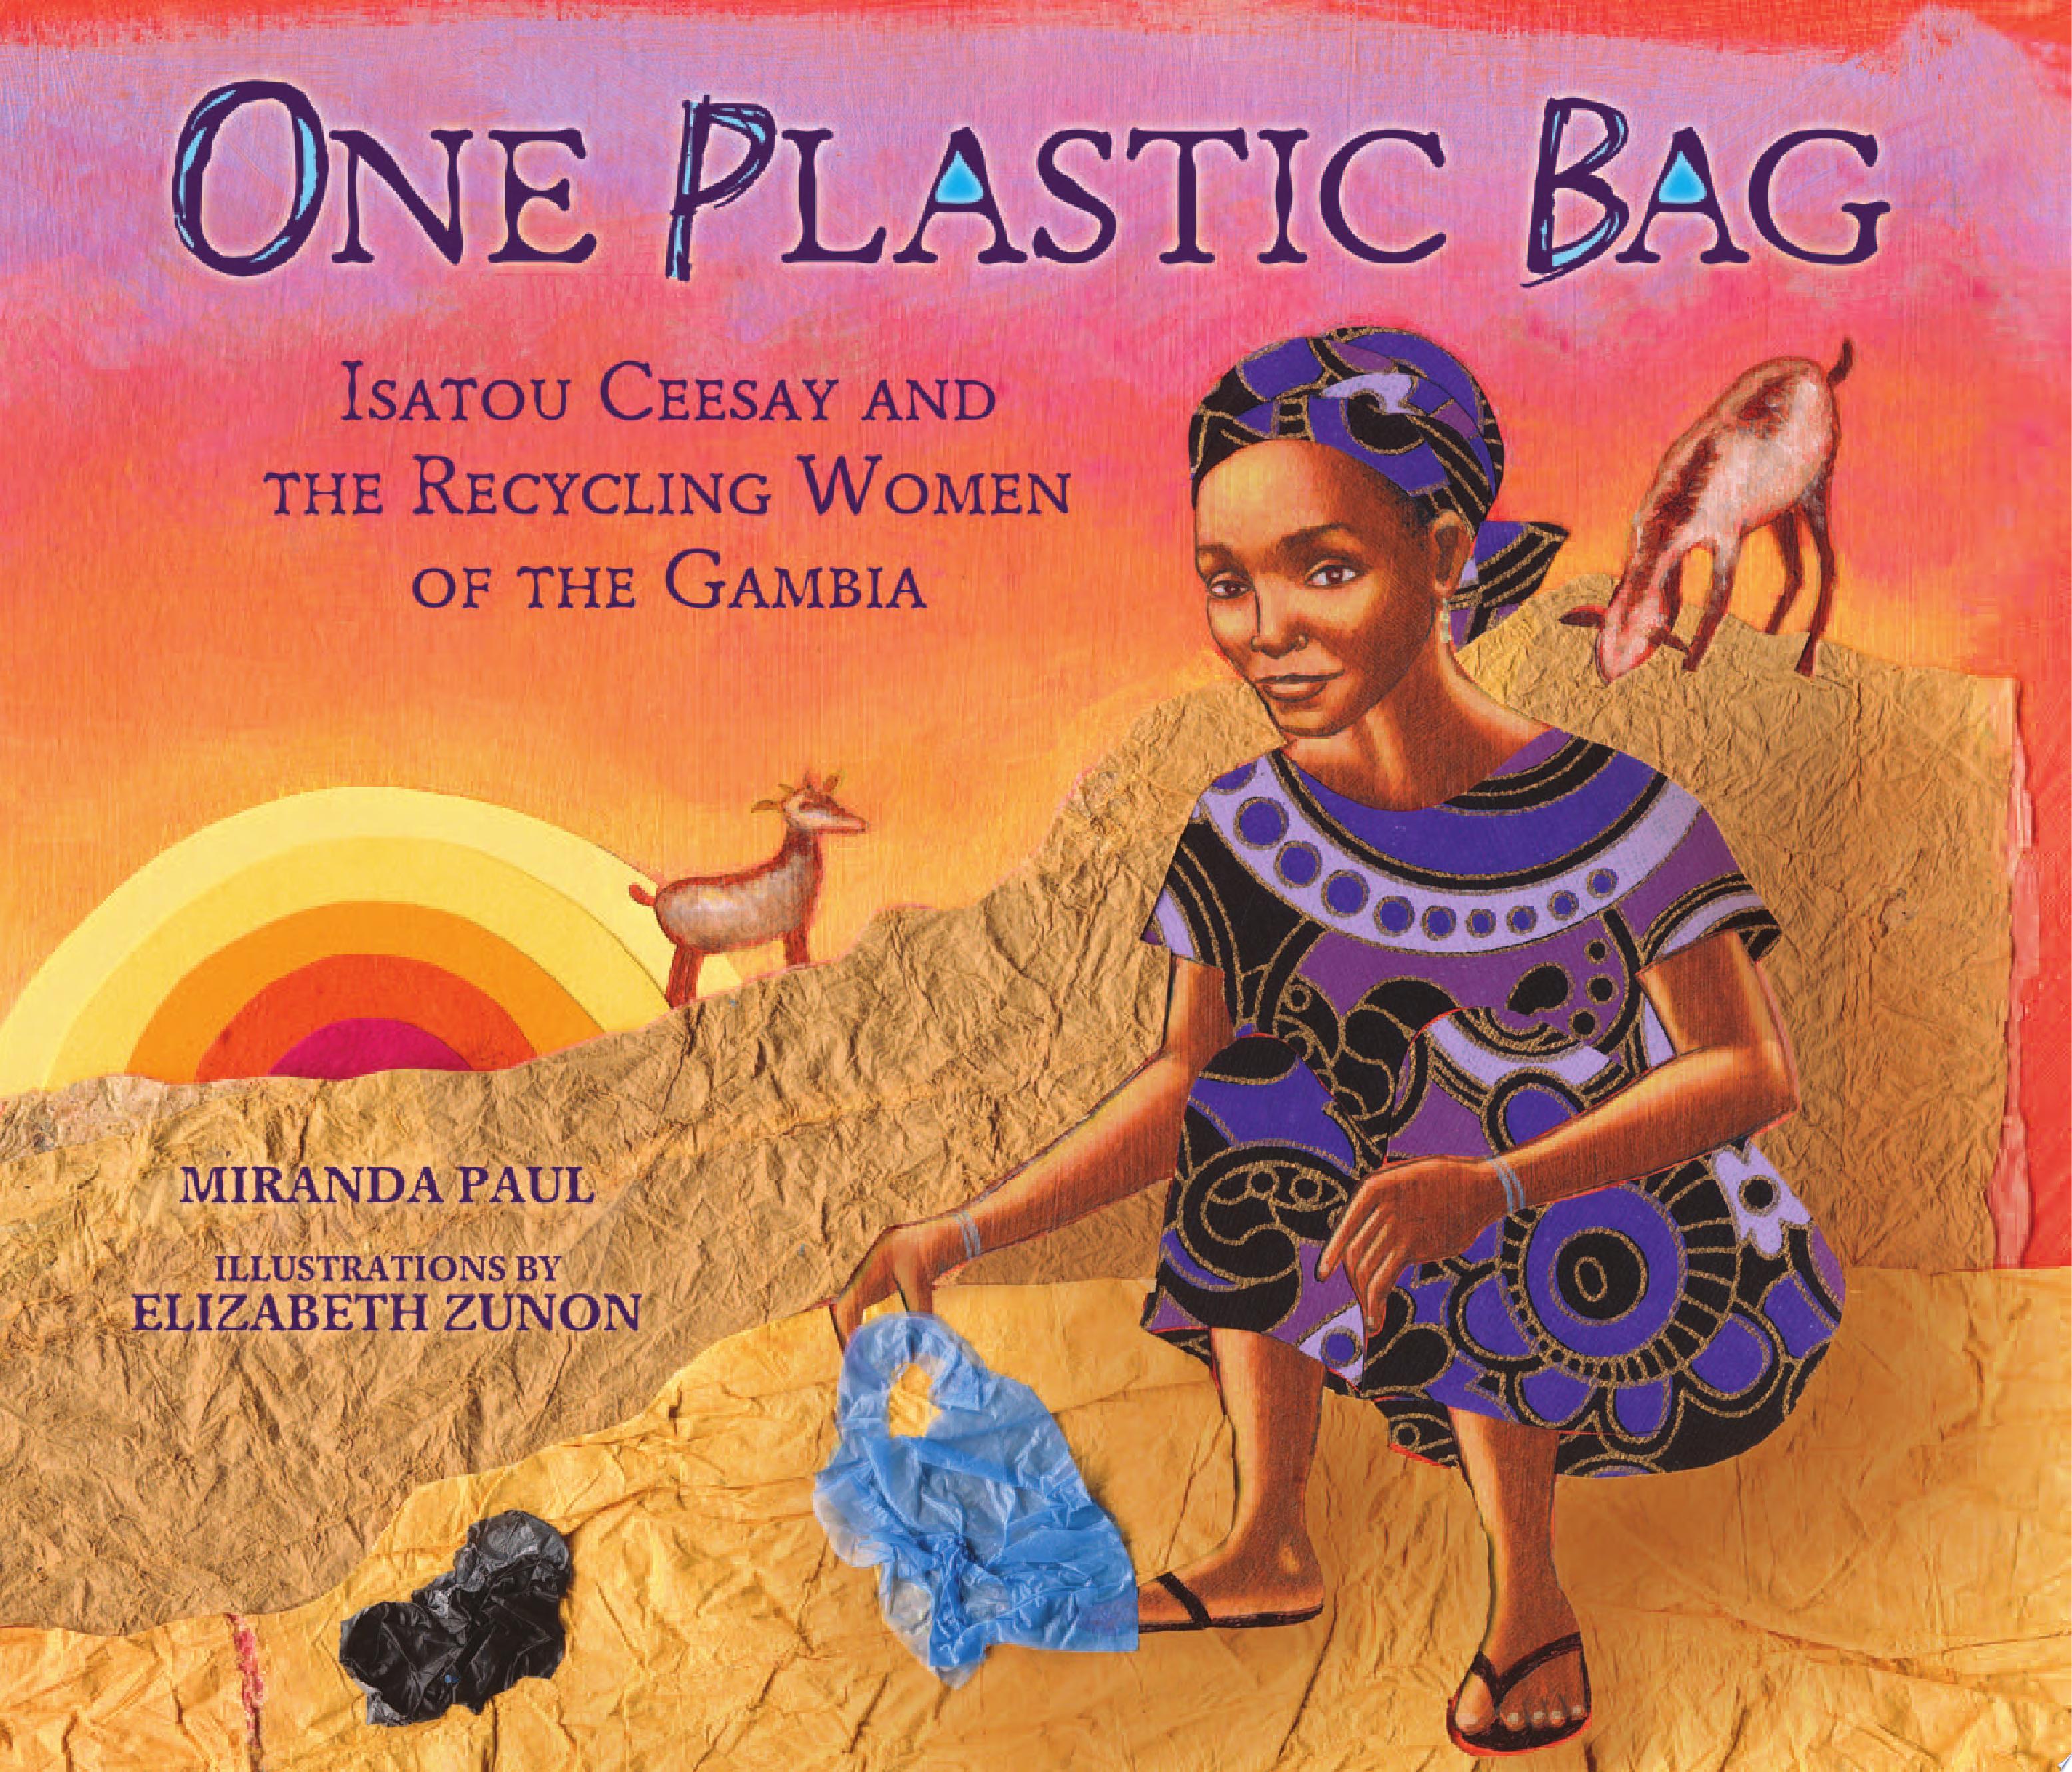 Image for "One Plastic Bag"